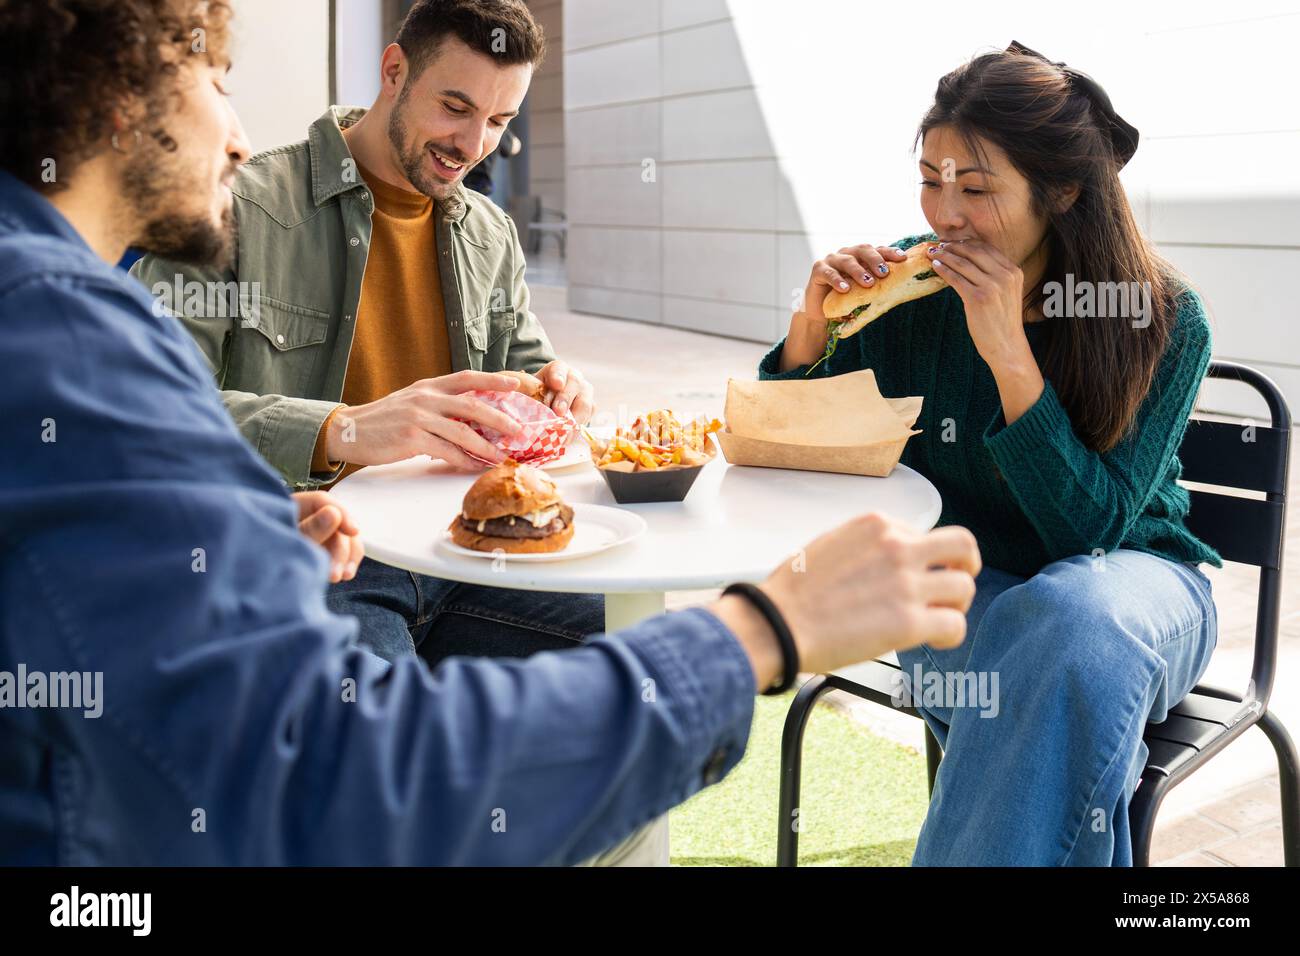 Group of friends enjoying fresh meals from a food truck at an outdoor seating area Stock Photo